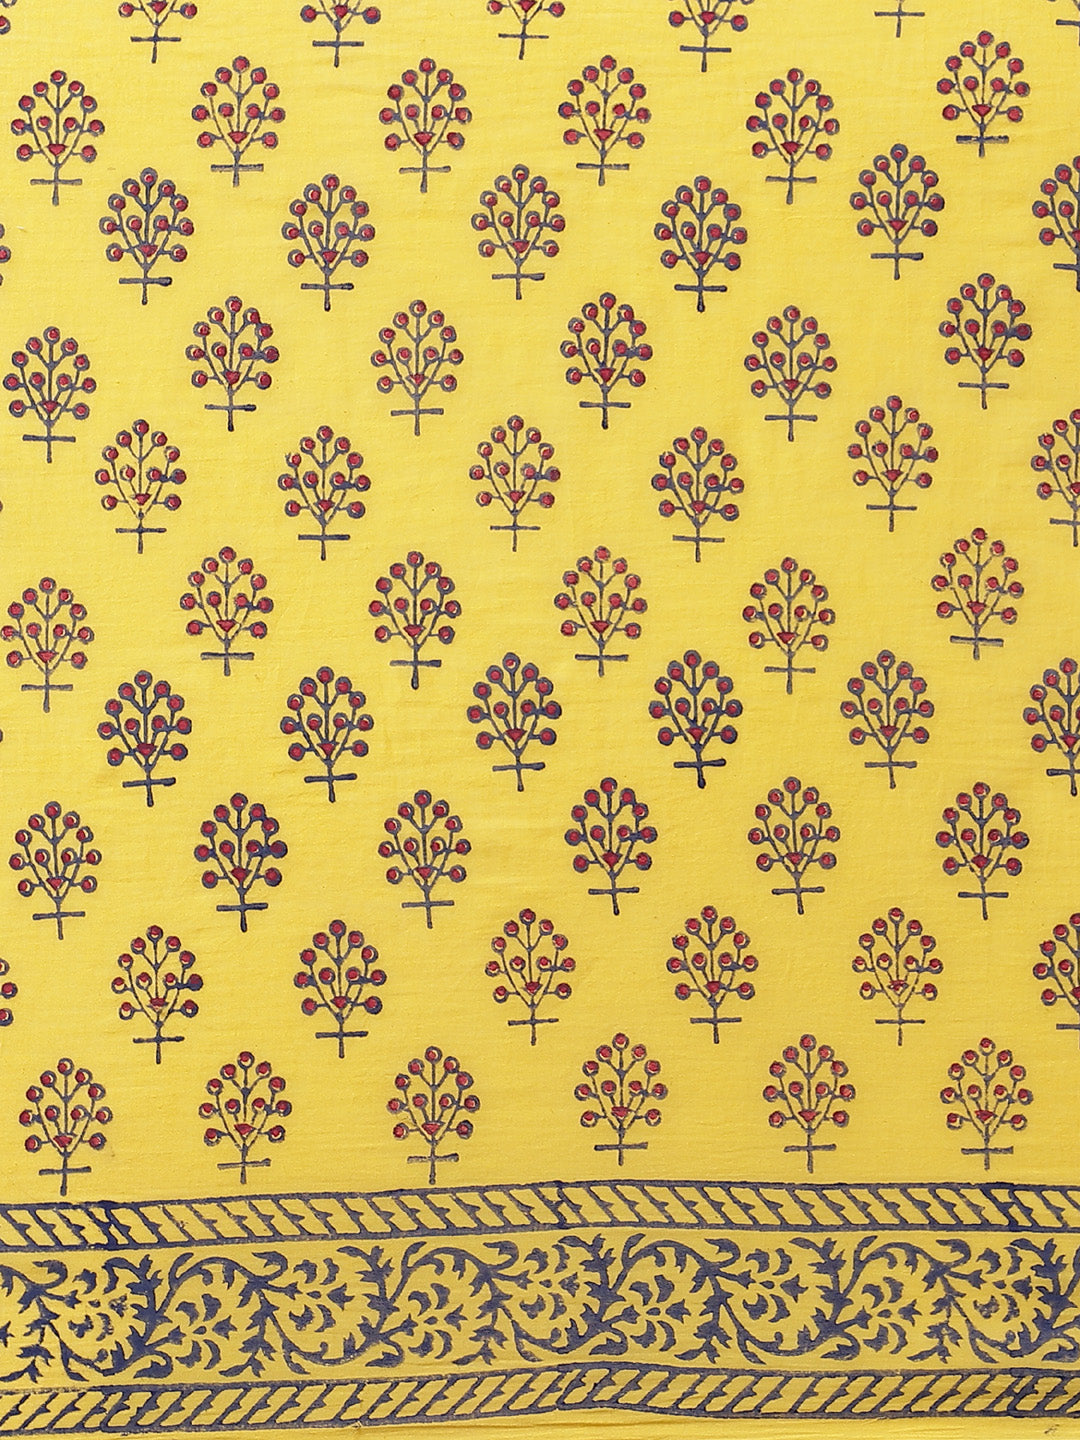 Yellow and Maroon, Kalakari India Cotton Yellow Hand crafted saree with blouse HUPASA0017-Saree-Kalakari India-HUPASA0017-Cotton, Geographical Indication, Hand Block, Hand Crafted, Heritage Prints, Natural Dyes, Red, Sarees, Sustainable Fabrics, Woven, Yellow-[Linen,Ethnic,wear,Fashionista,Handloom,Handicraft,Indigo,blockprint,block,print,Cotton,Chanderi,Blue, latest,classy,party,bollywood,trendy,summer,style,traditional,formal,elegant,unique,style,hand,block,print, dabu,booti,gift,present,glamo